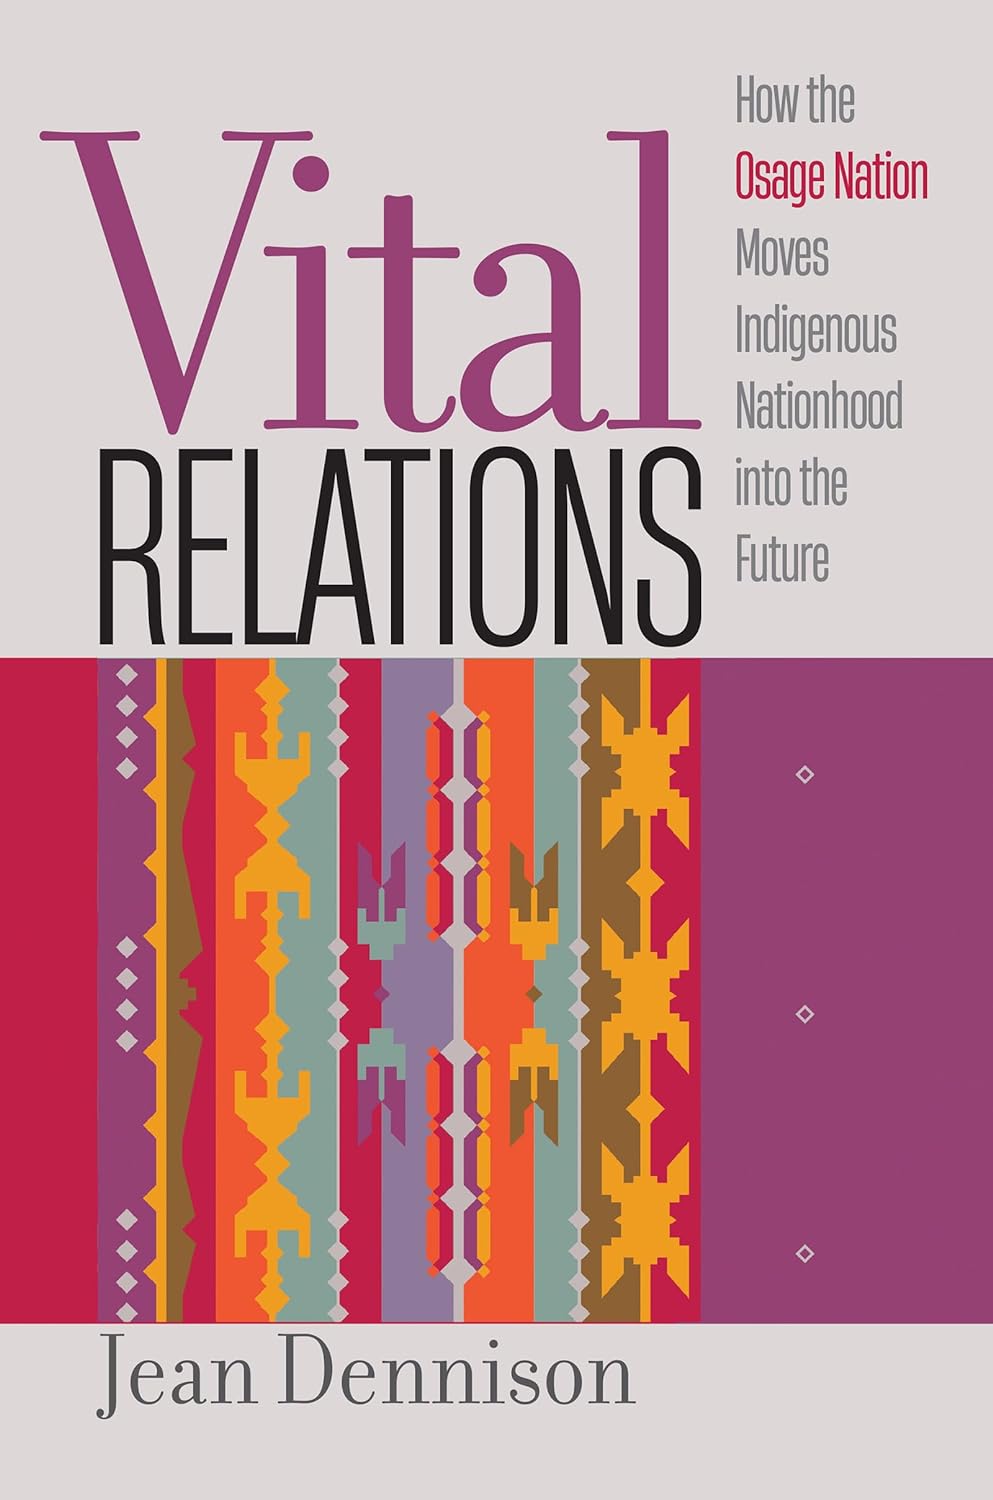 Vital Relations: How the Osage Nation Moves Indigenous Nationhood into the Future by Jean Dennison